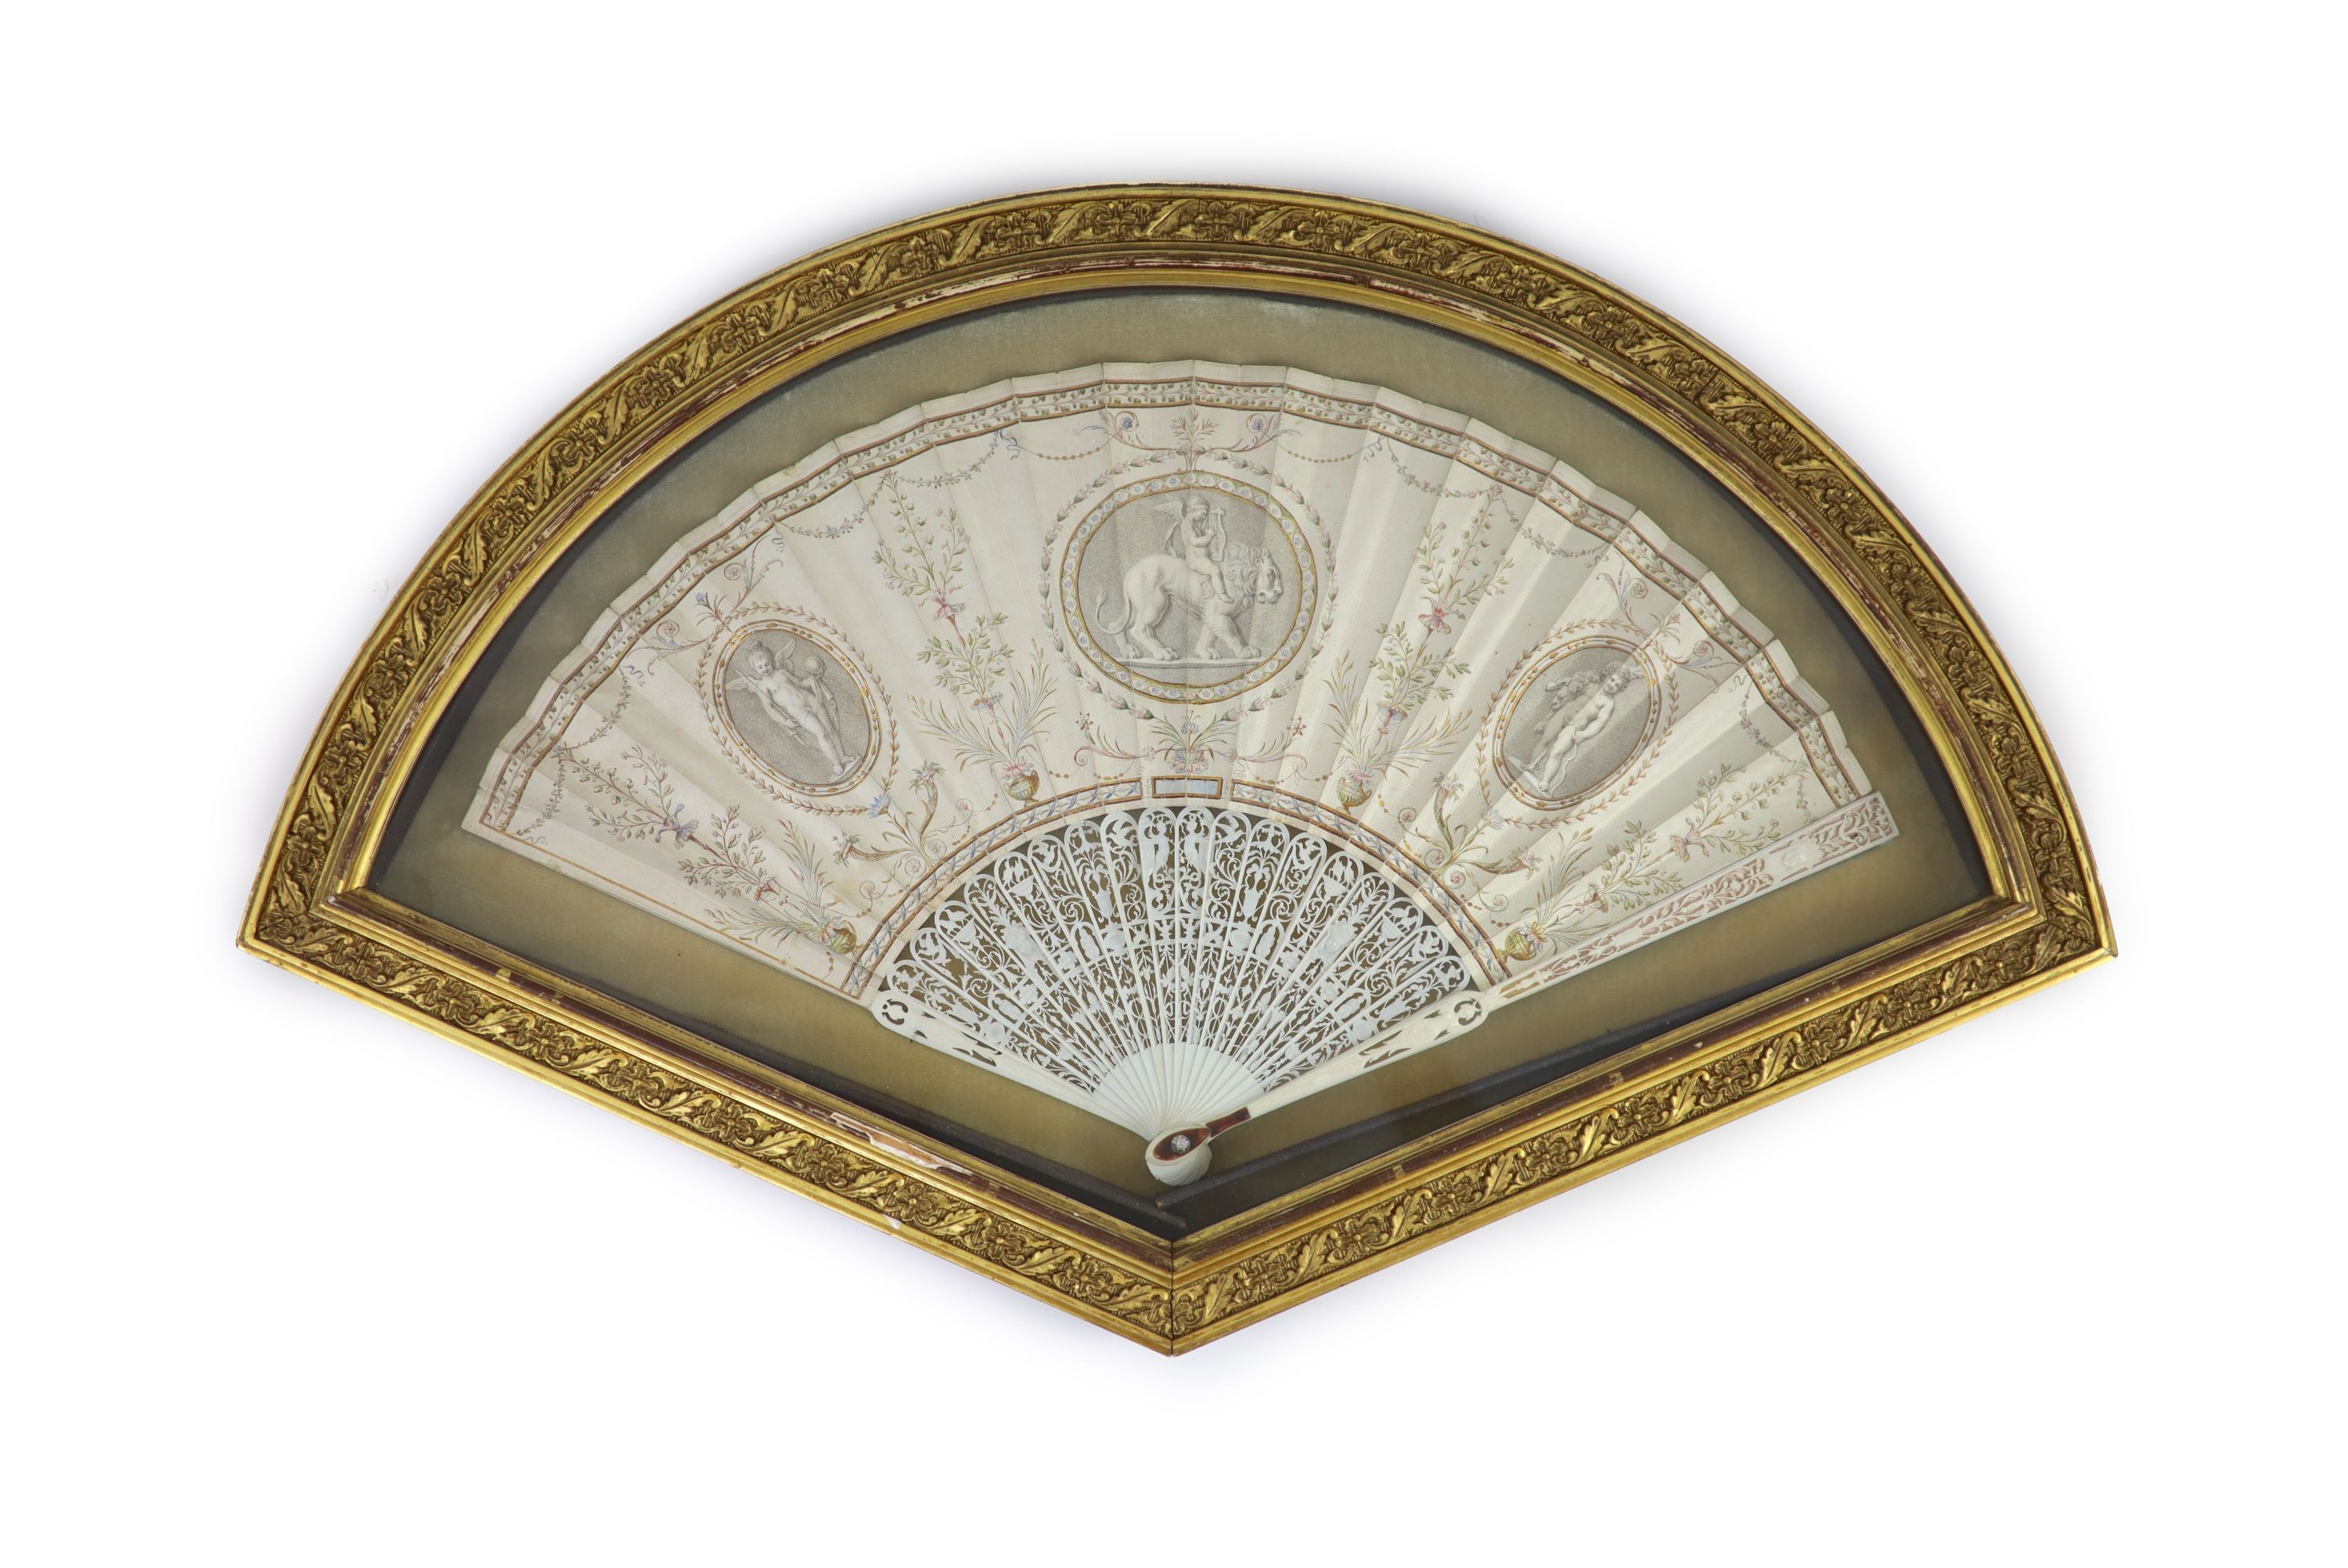 A fine late 18th century ivory and printed vellum fan, engraved by F. Bartolozzi (1727-1815), fan radius 27.5cm, case 62cm wide